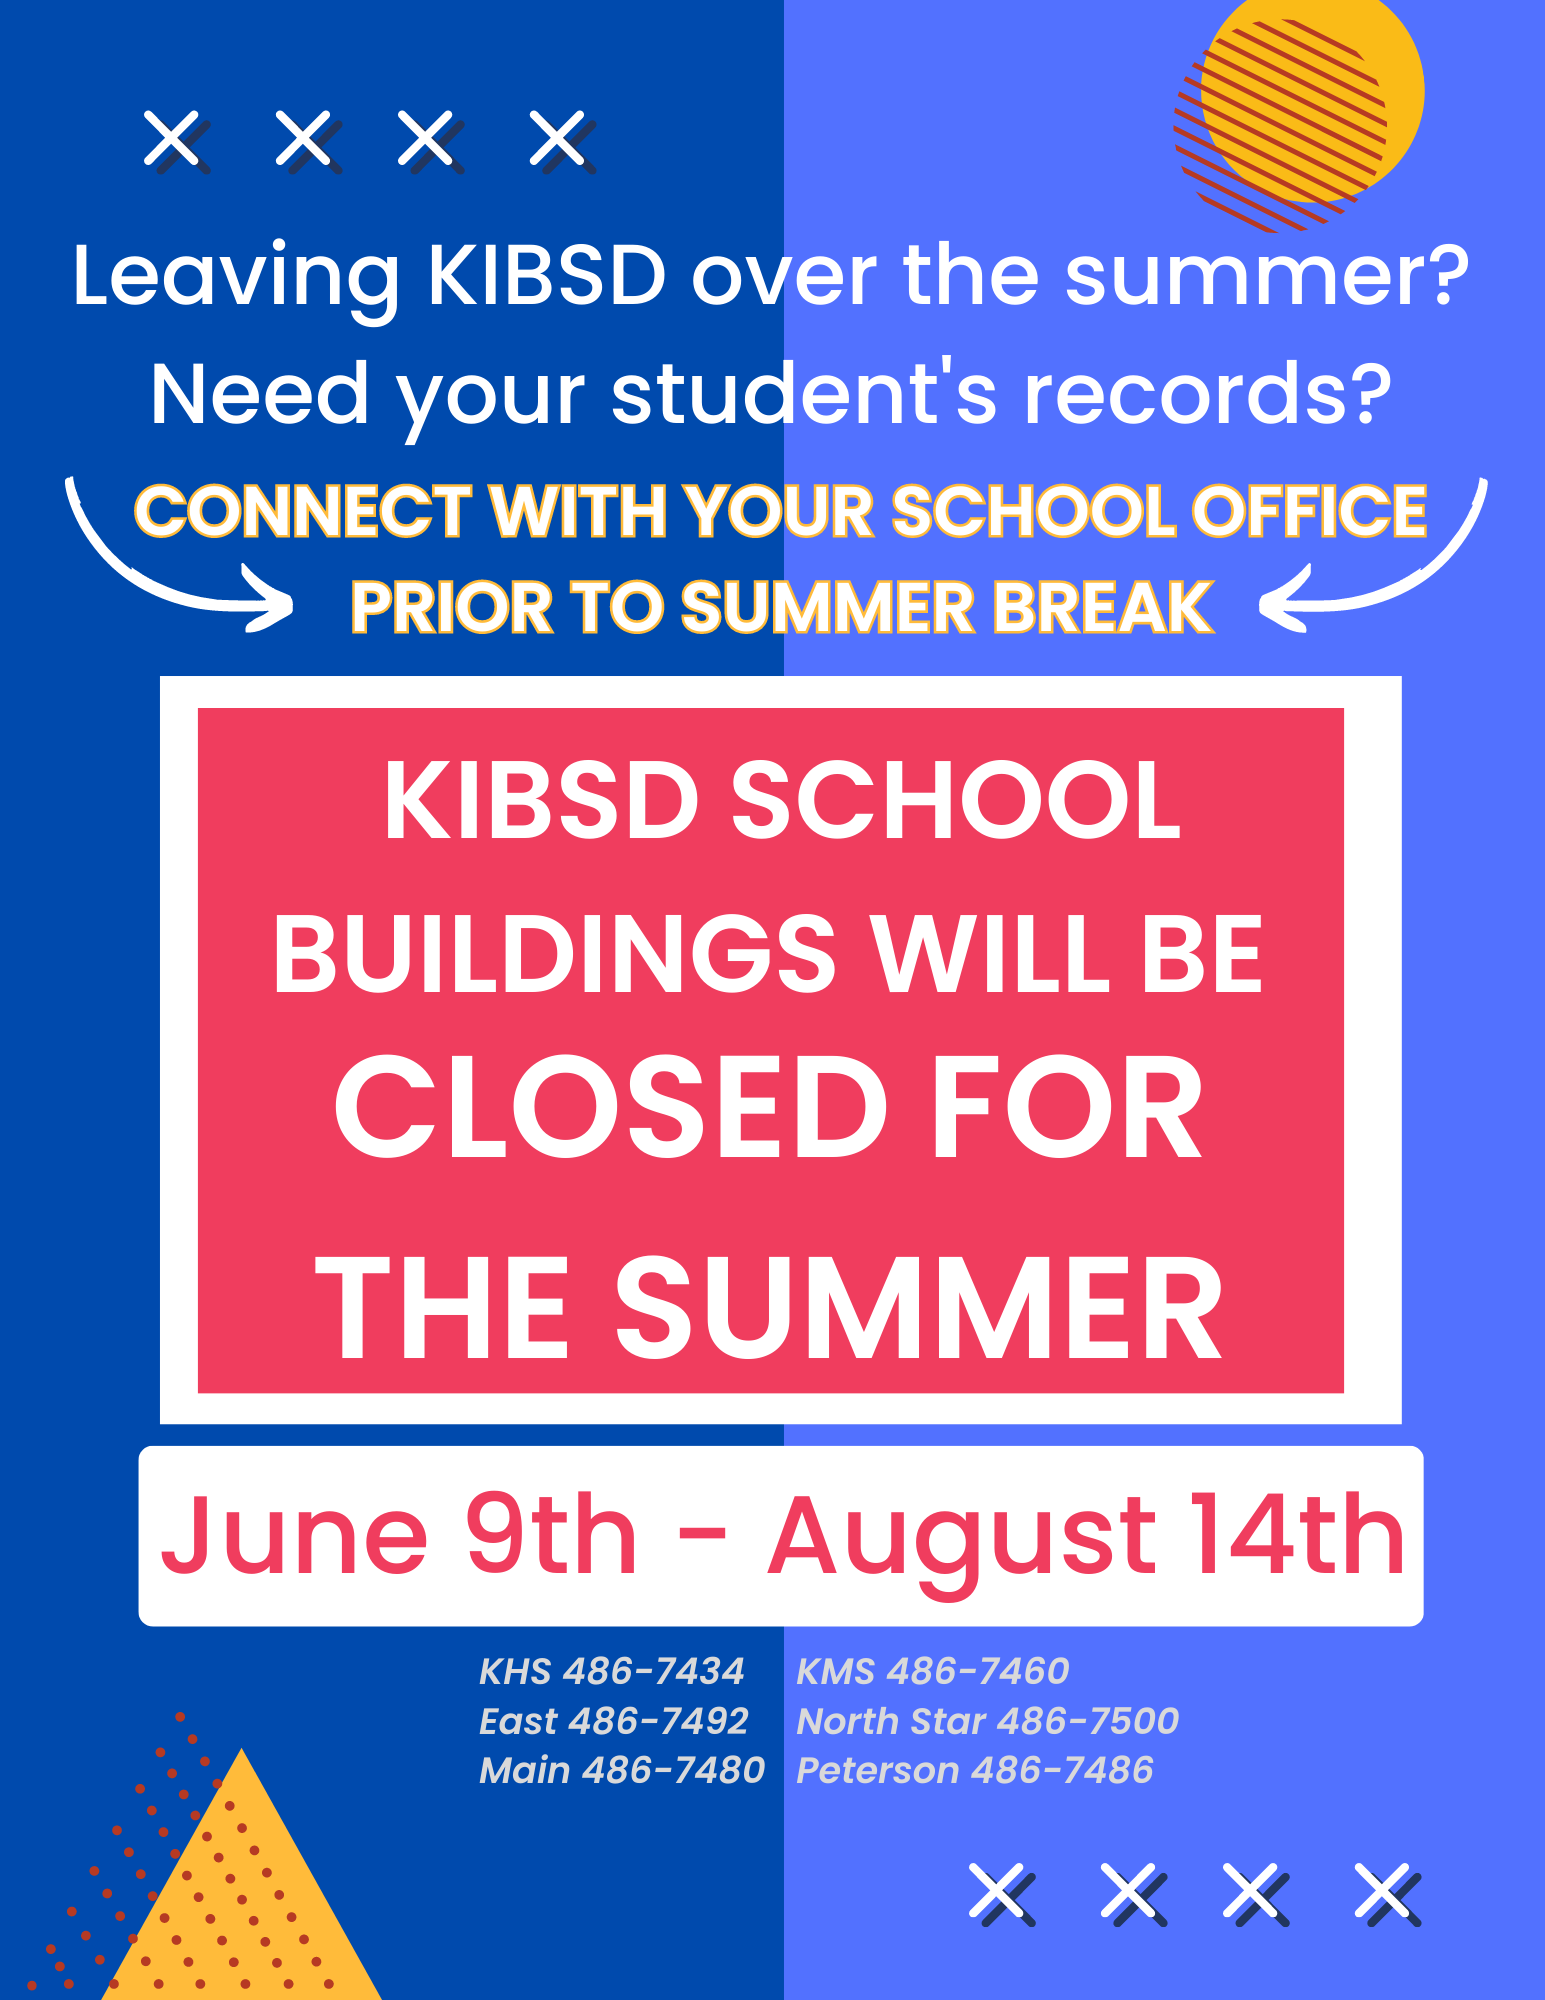 Informational flyer regarding summer break closure from June 9th-August 14th. Please request student records prior to June 9th.